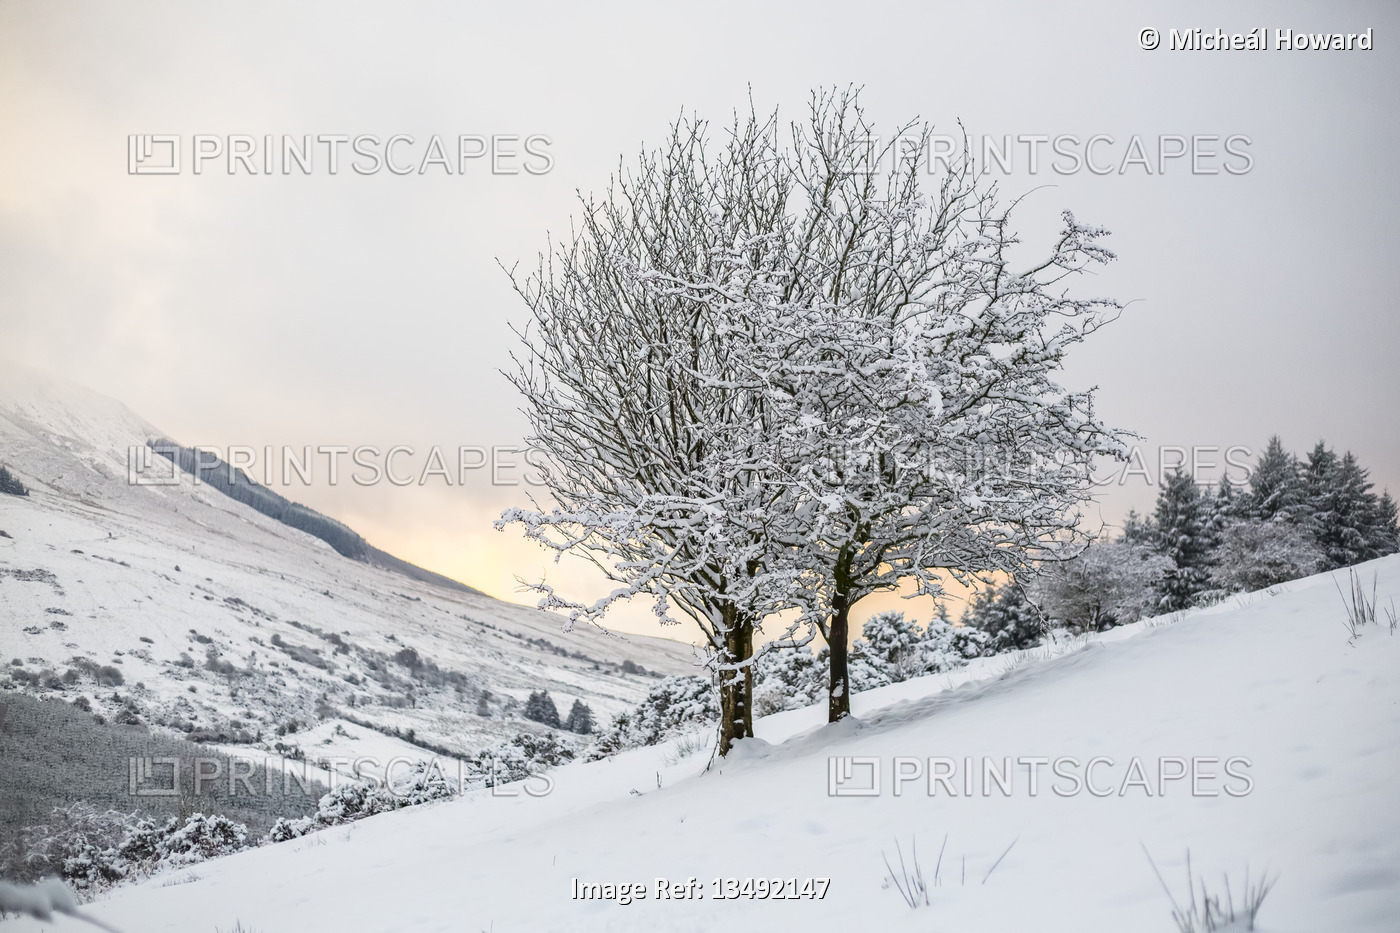 Two trees on a snow-covered slope in the Silvermine Mountains in Tipperary in ...